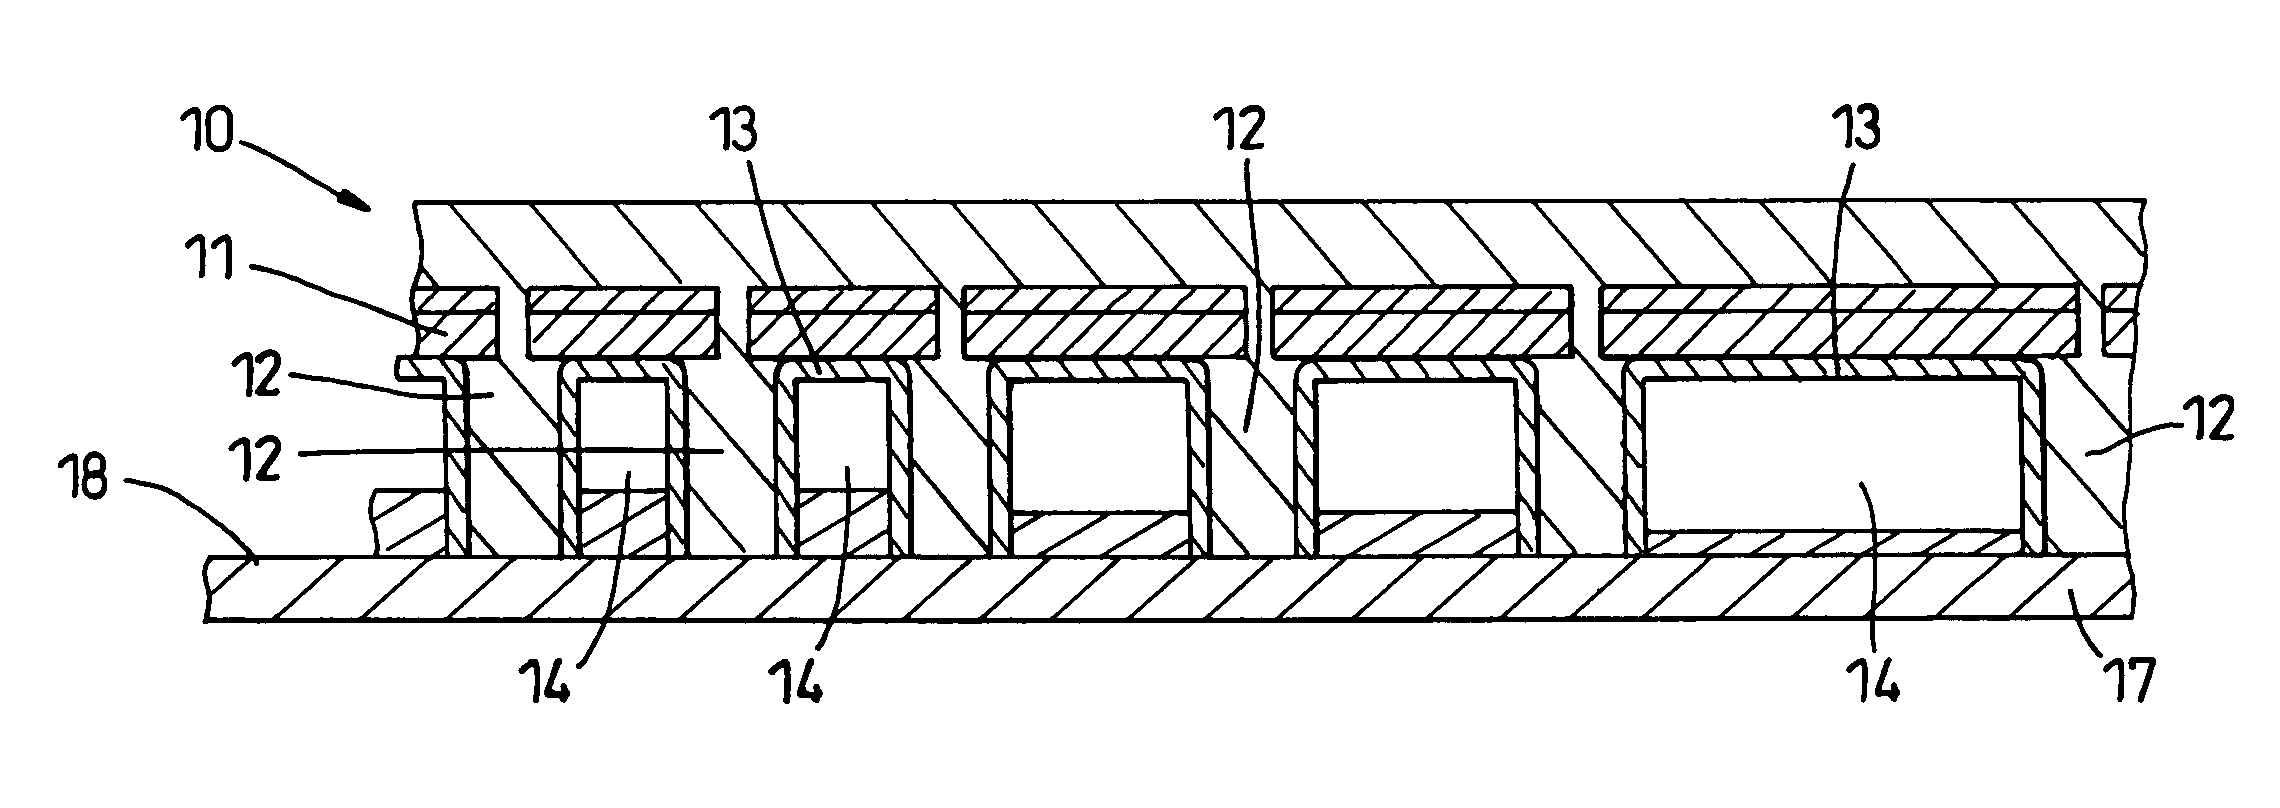 Method of forming a substantially closed void